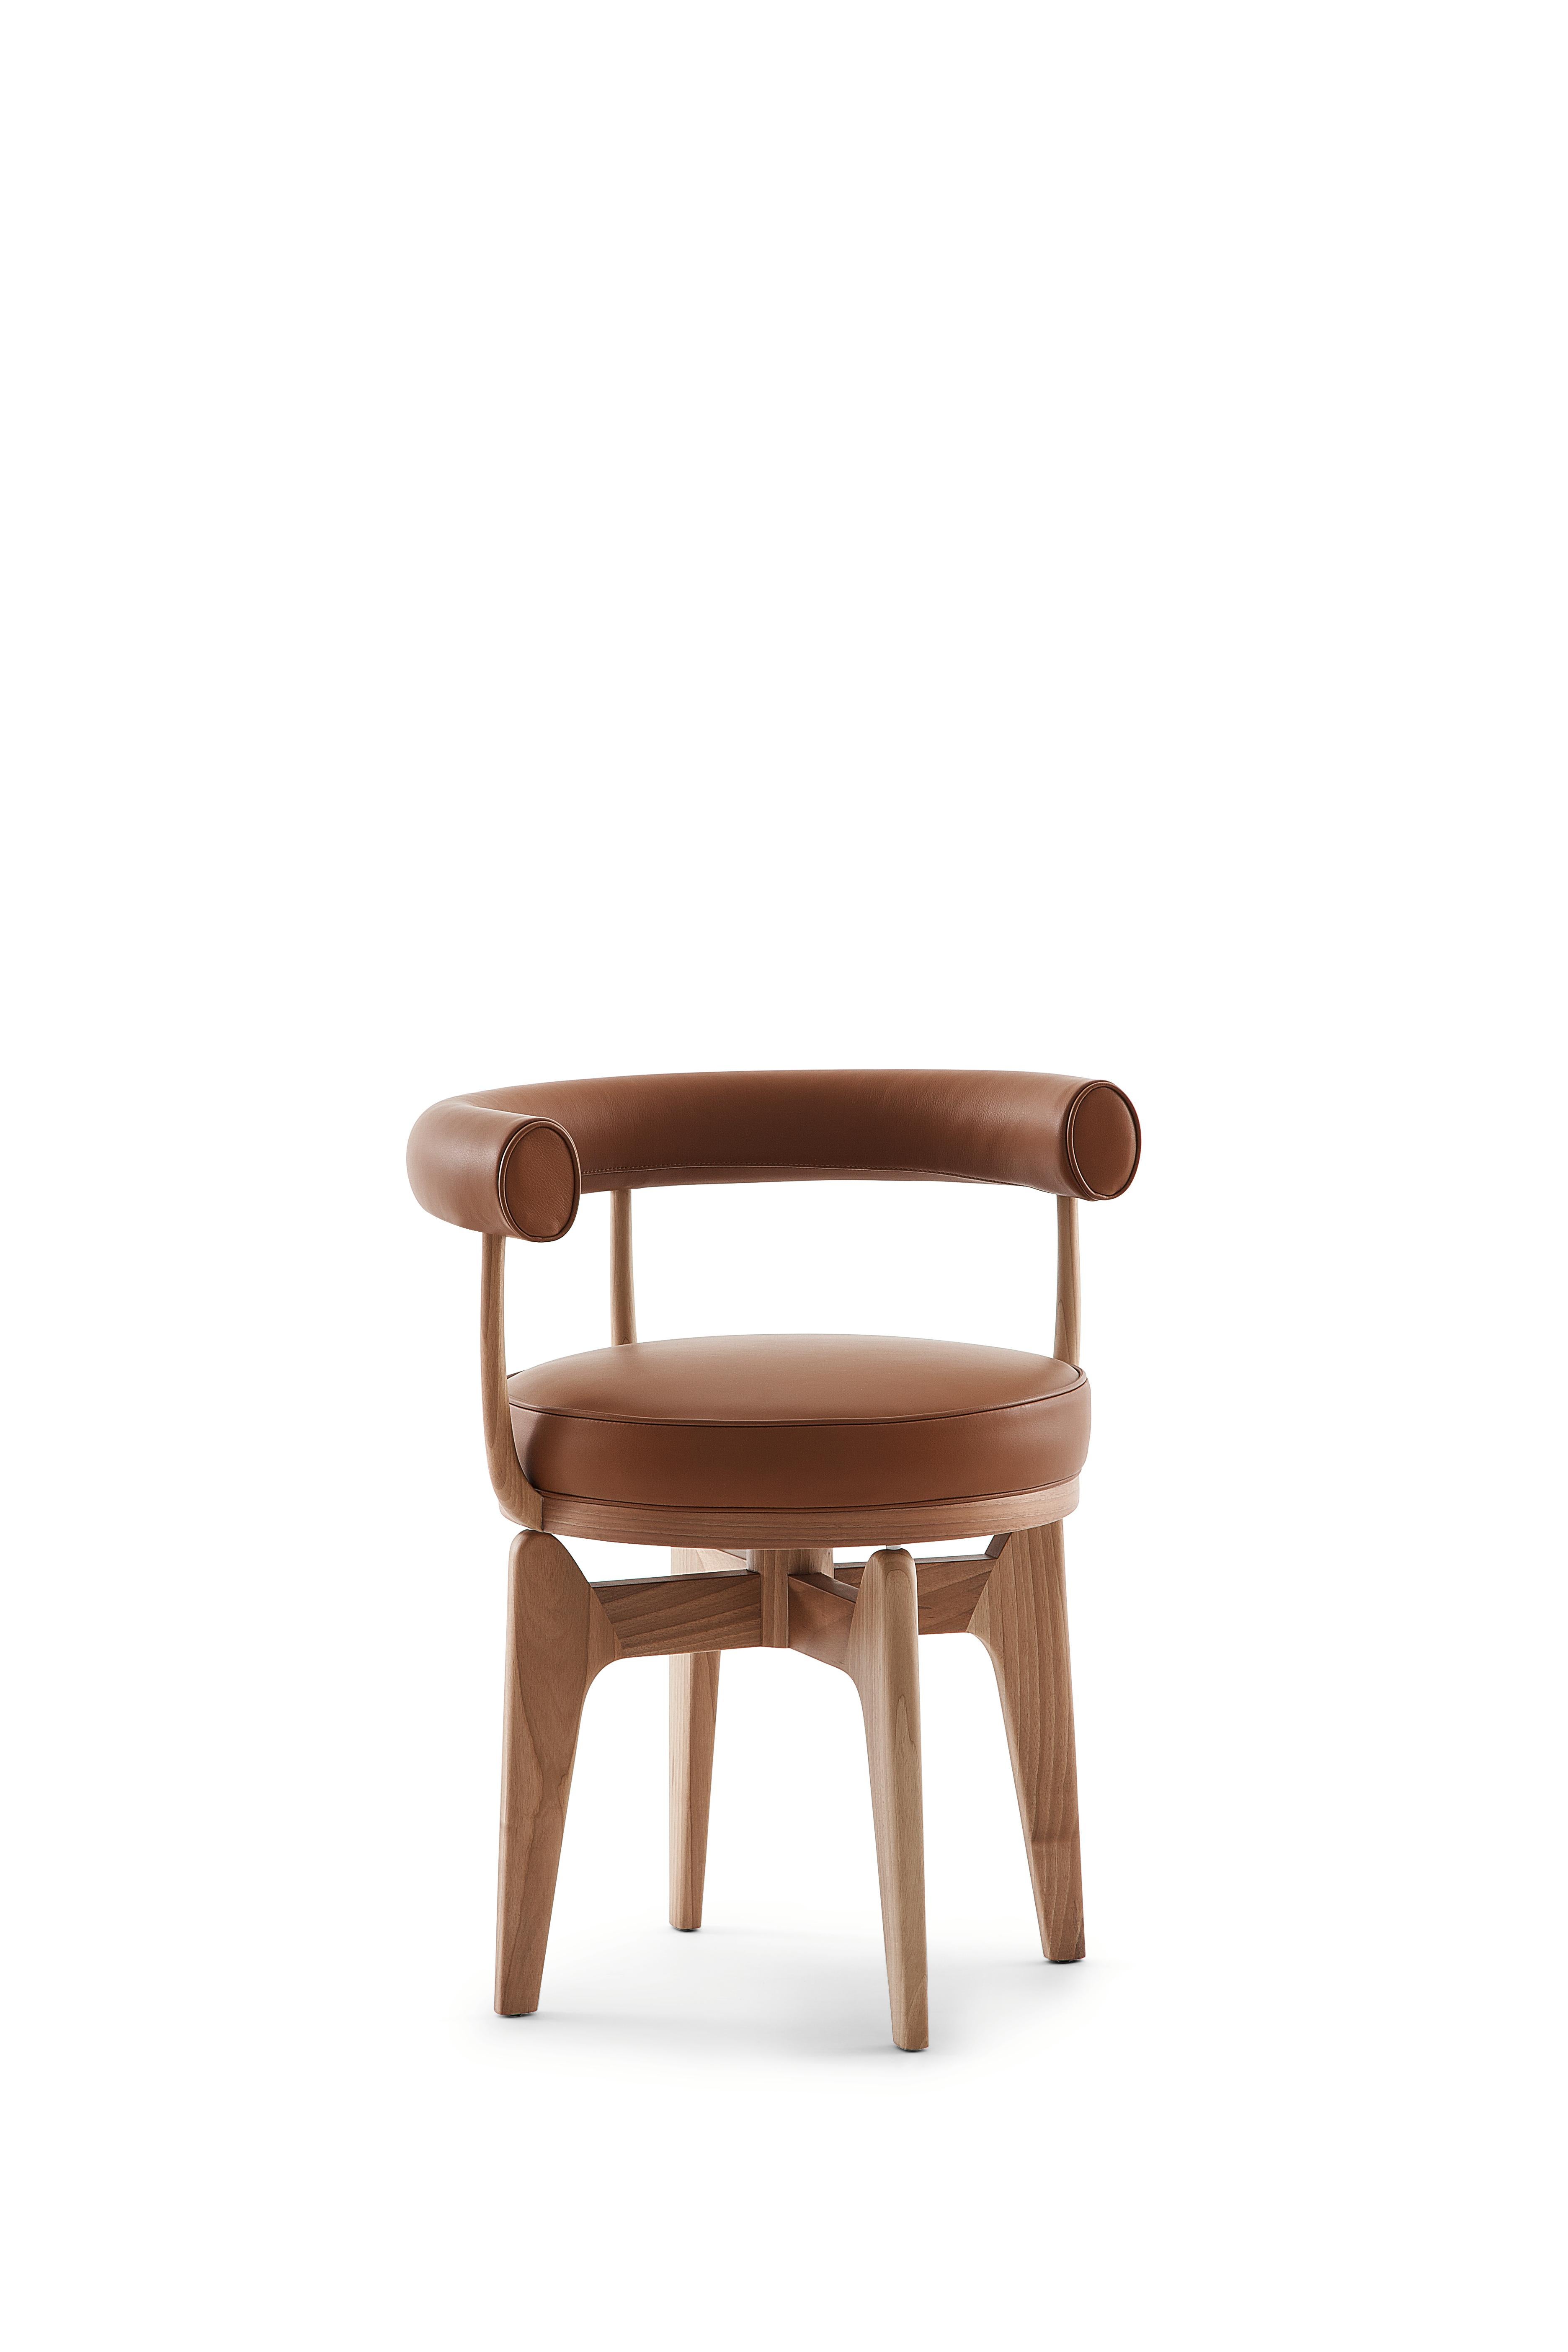 Charlotte Perriand Indochine Armchair
Manufactured by Cassina in Italy

This swivel armchair is a re-working of the LC7, whose frame was in tubular metal, and was the work of Charlotte Perriand in 1927. It was later exhibited along with other